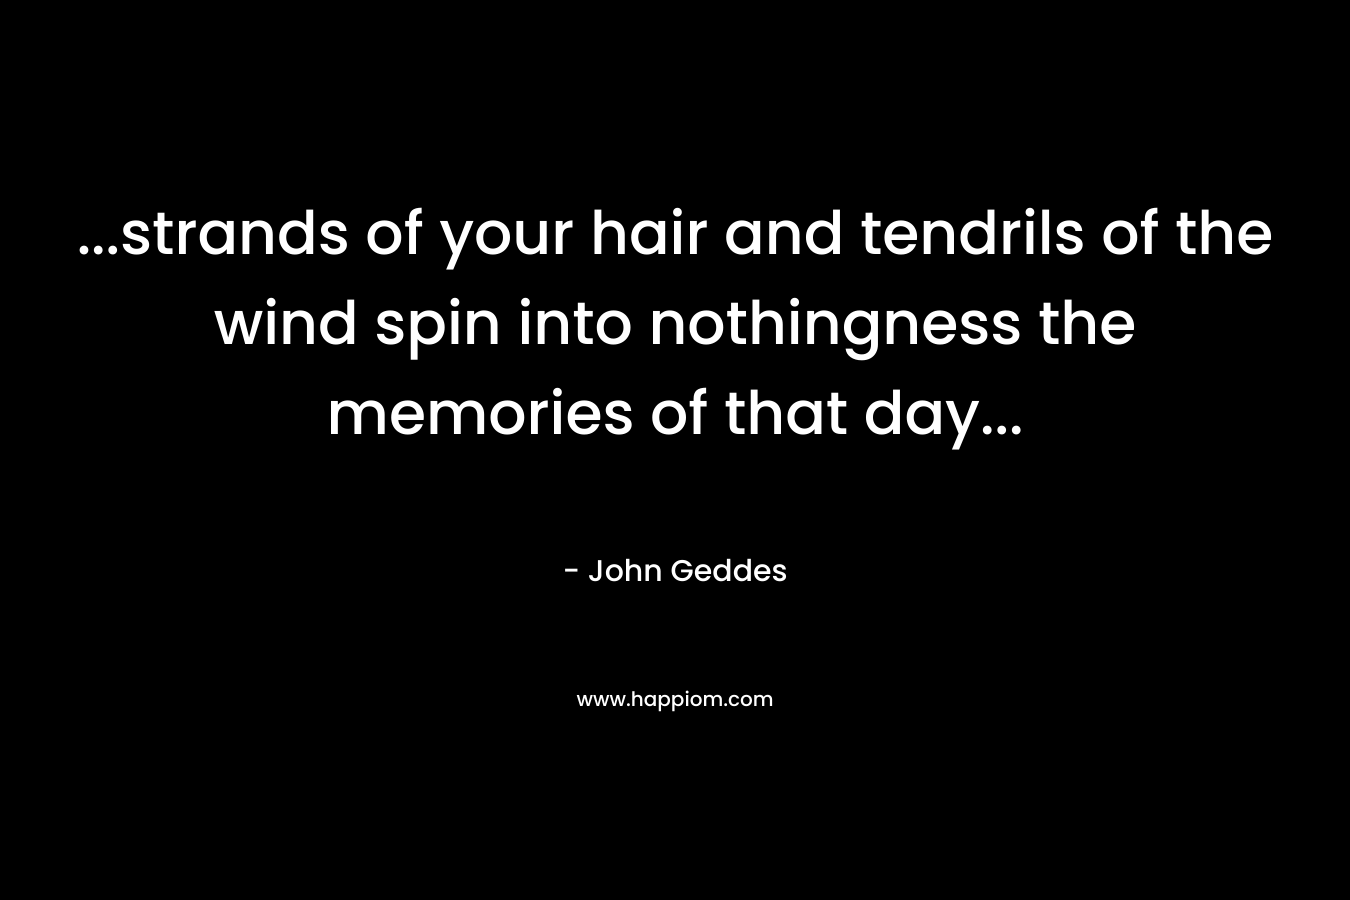 ...strands of your hair and tendrils of the wind spin into nothingness the memories of that day...